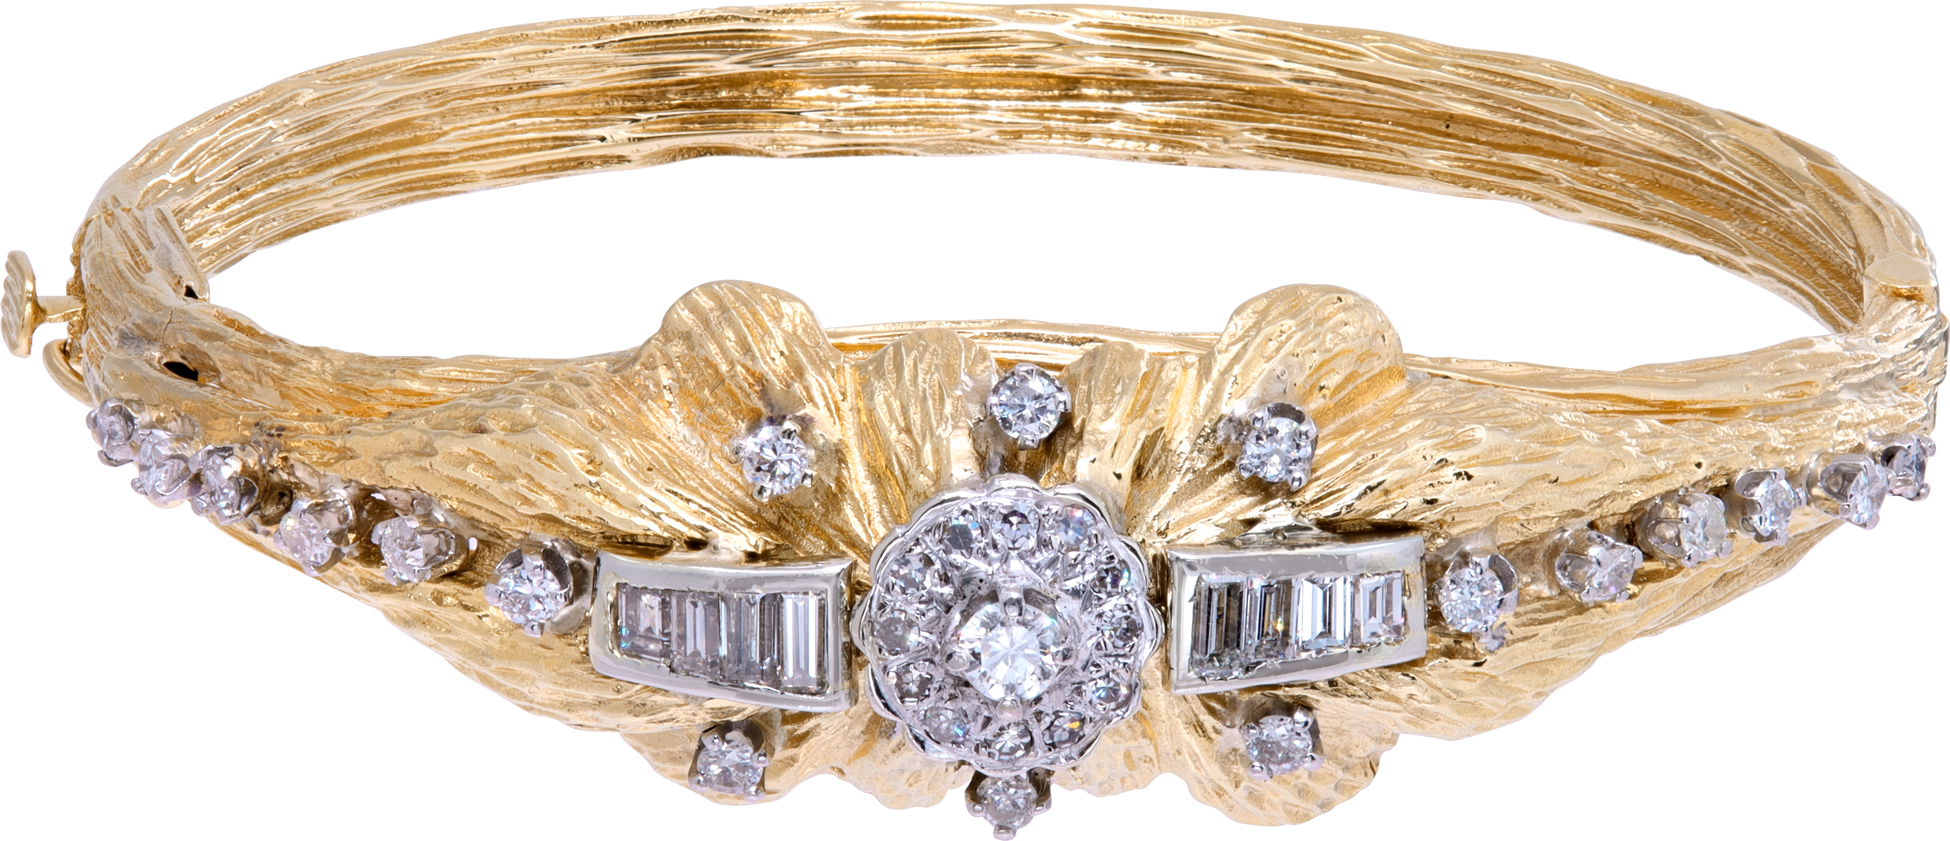 Vintage hinged diamonds bangle bracelet in bark finished 18k yellow gold. Round & baguettes cut diamonds total approx.weight: 1.50 carat